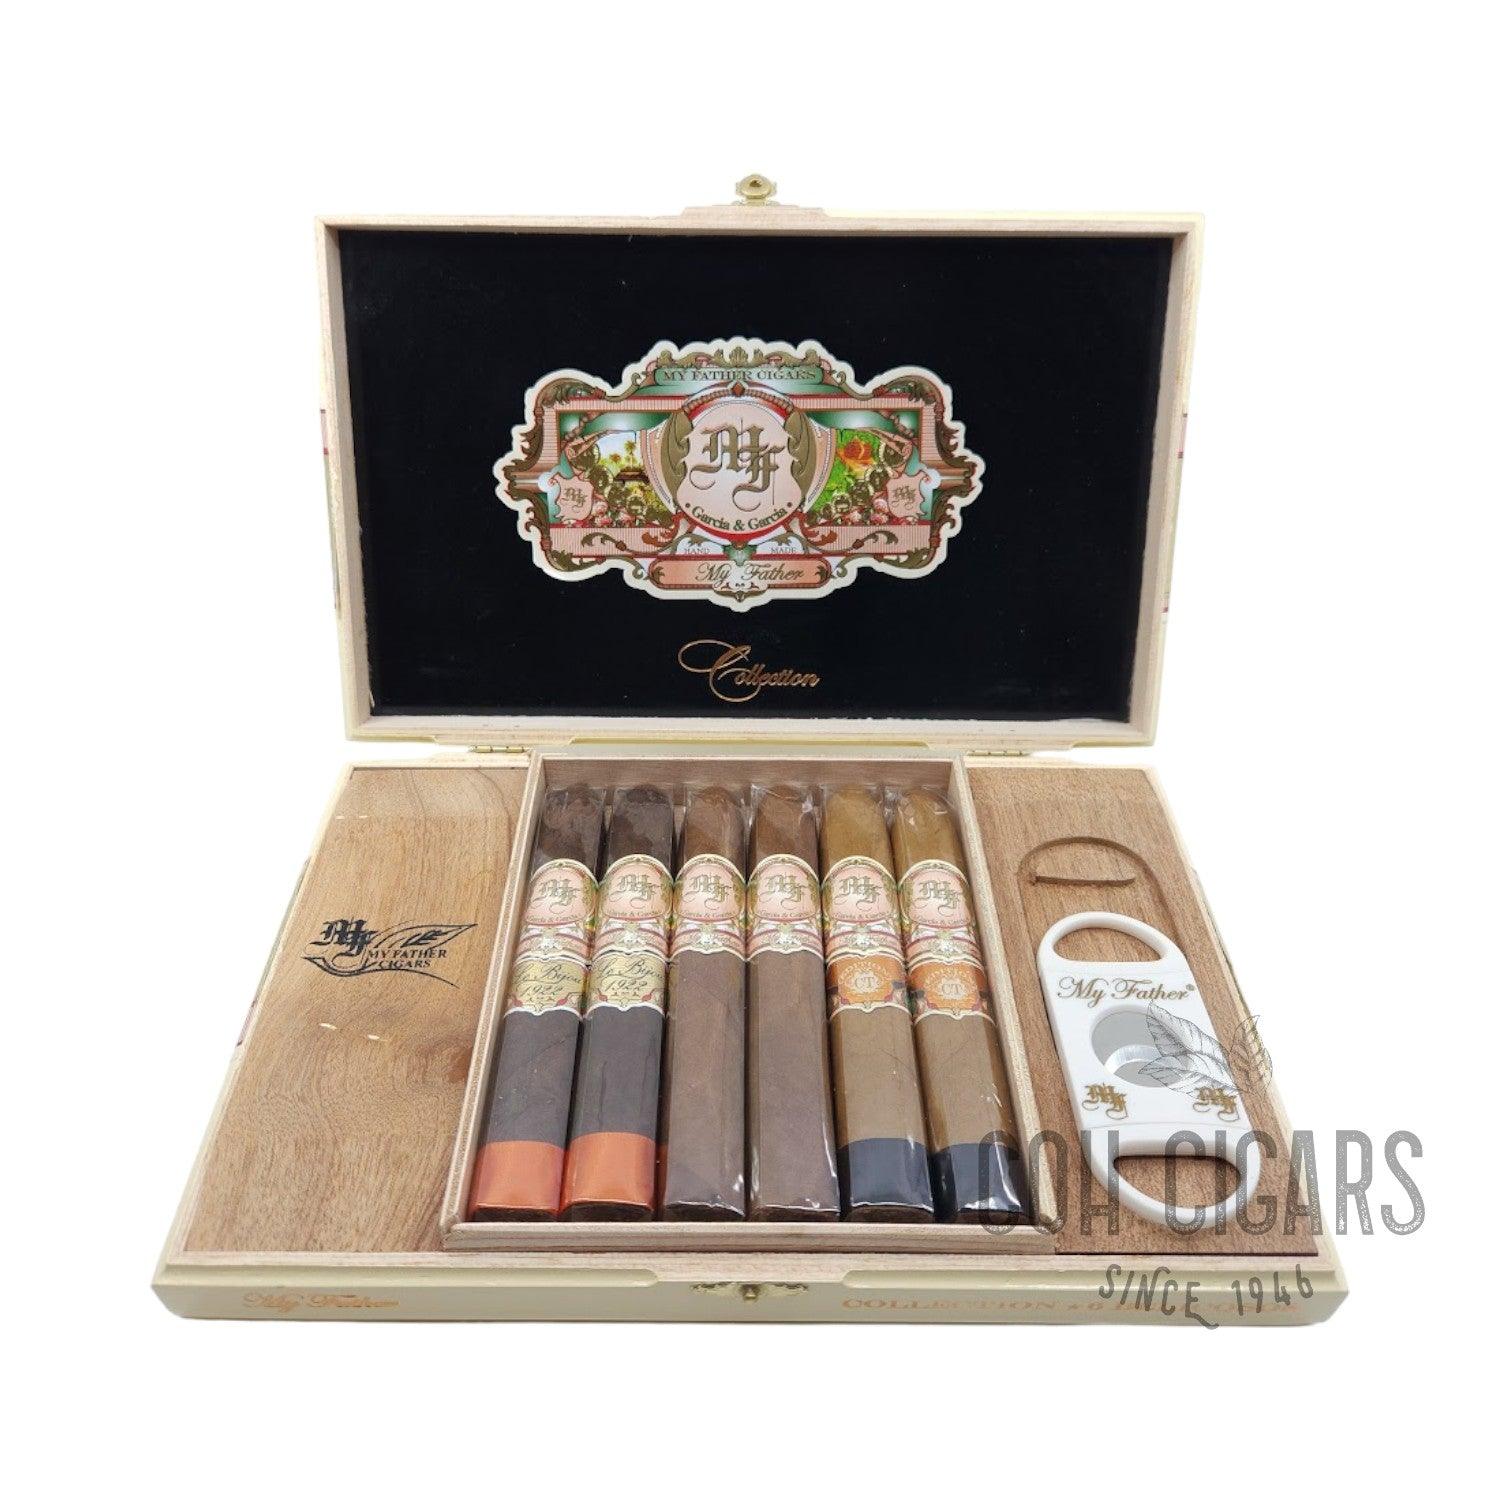 My Father Collection Belicosos Box 6 - hk.cohcigars